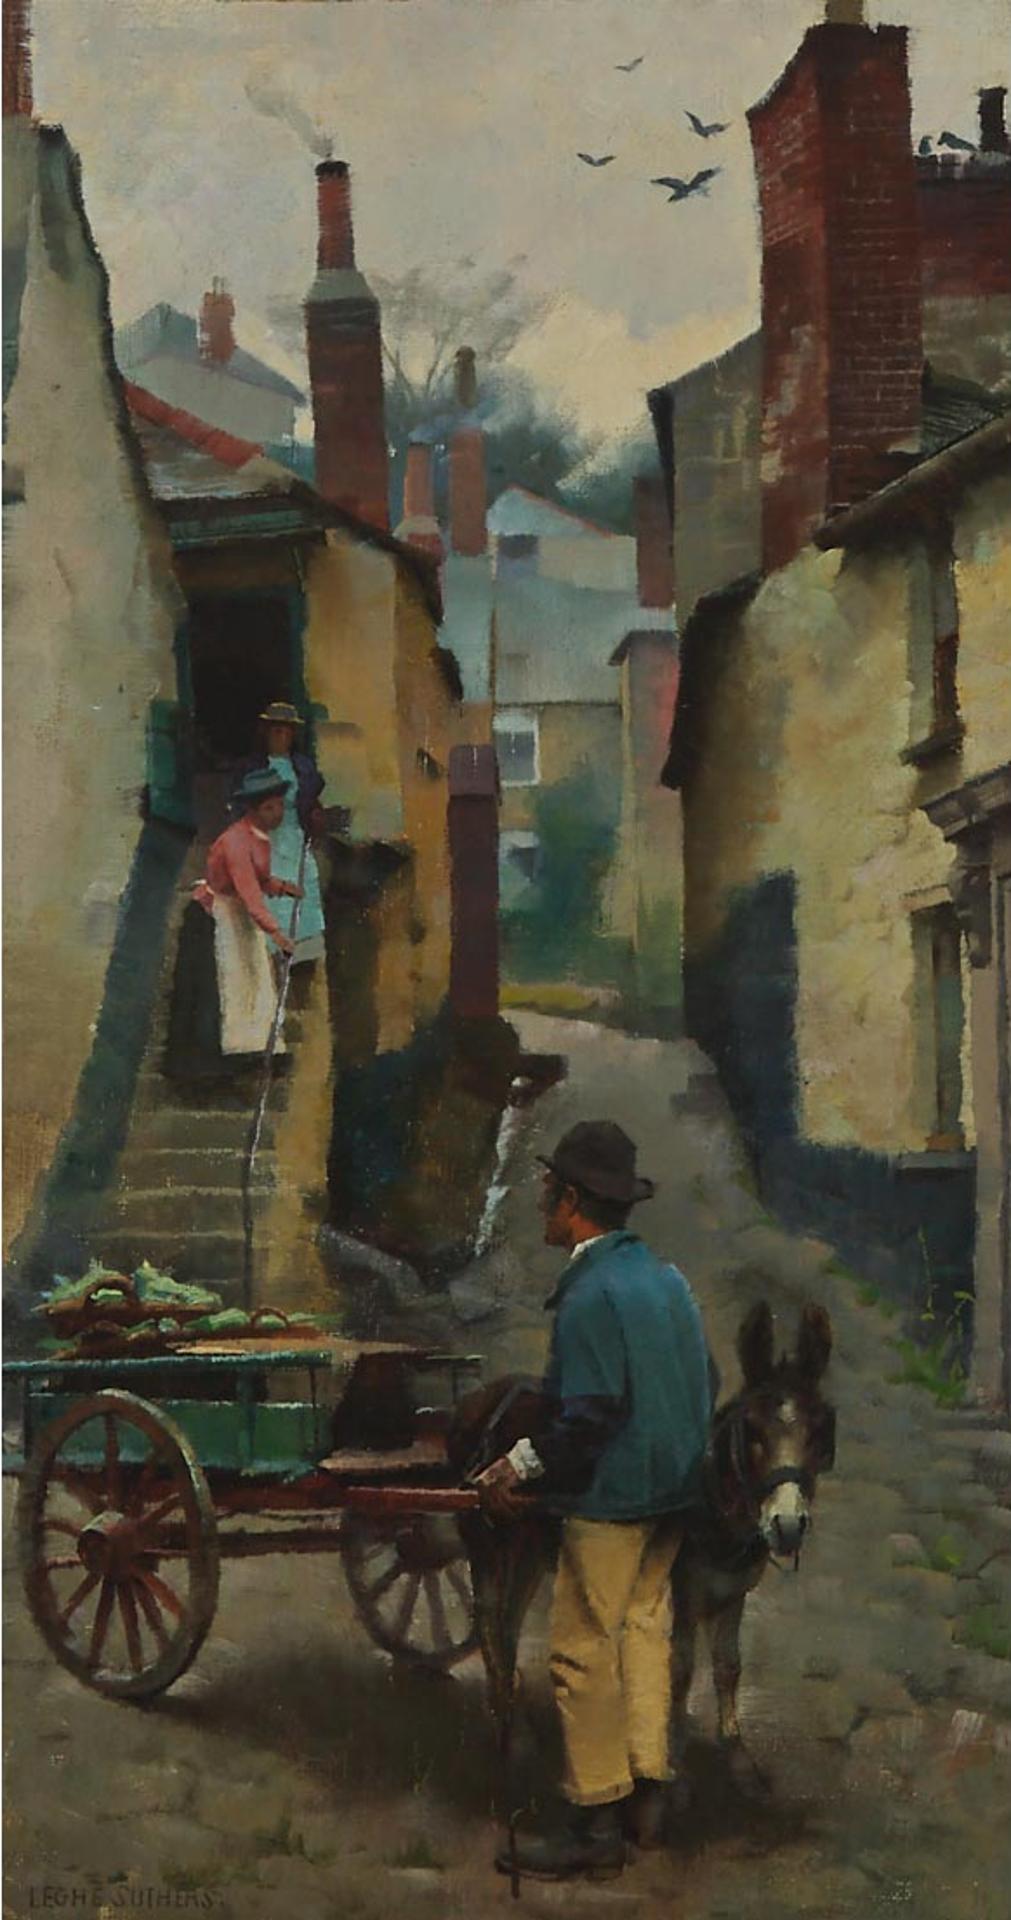 Leghe Suthers (1856-1924) - Village Lane With Vegetable Merchant